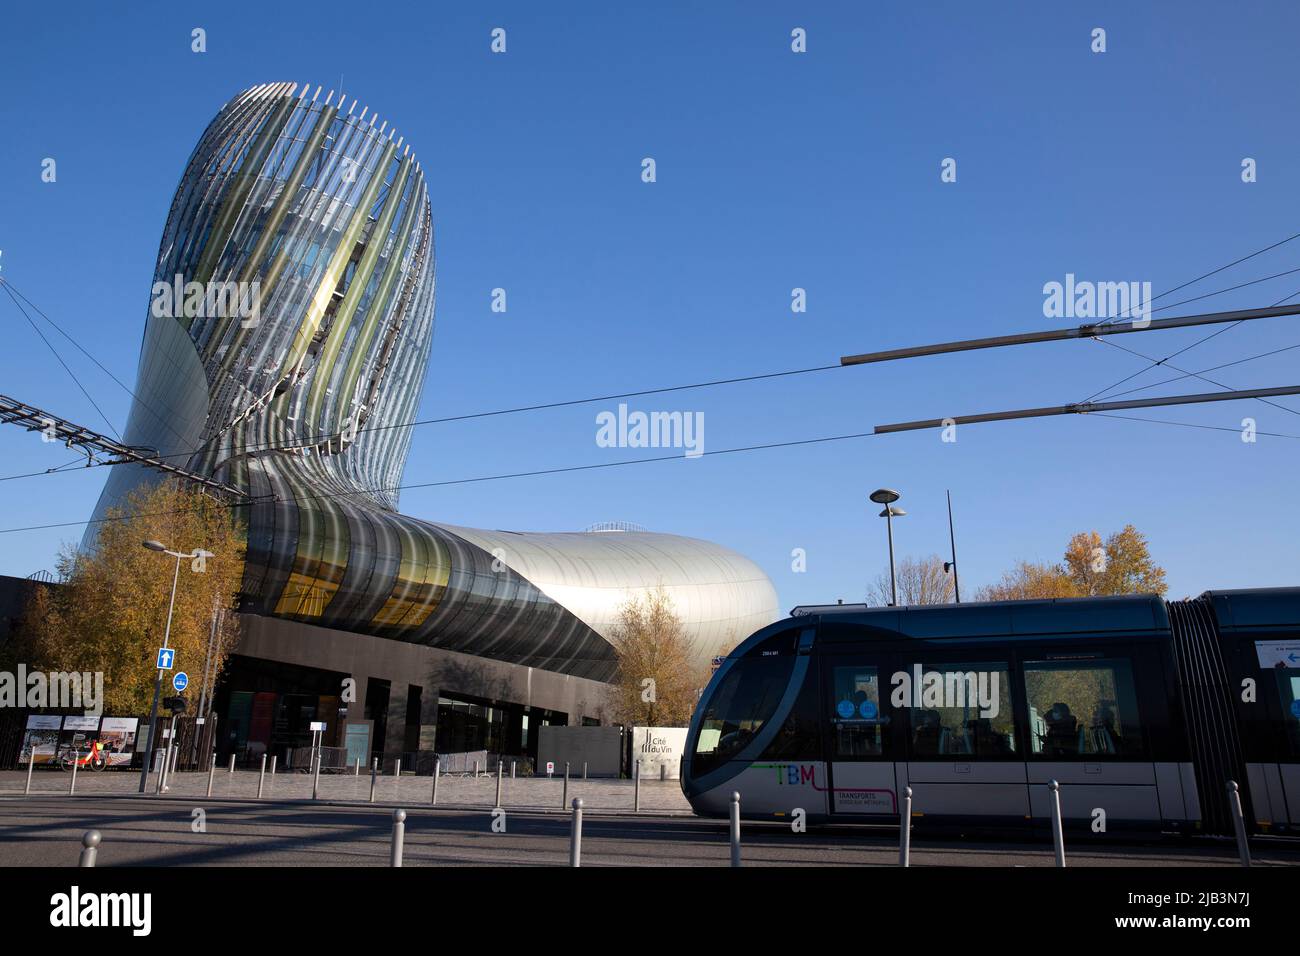 The Cité du Vin and the tram in Bordeaux, France on November 19, 2021. The Cité du Vin was inaugurated in 2016 with the goal of celebrating wine and educating people about its production and history. The 13,350 m² space is considered to be the best wine center in the world. It's been designed by the French architectural company, XTU, with the exhibitions designed by the British firm Casson Mann. Photograph by Bénédicte Desrus Stock Photo